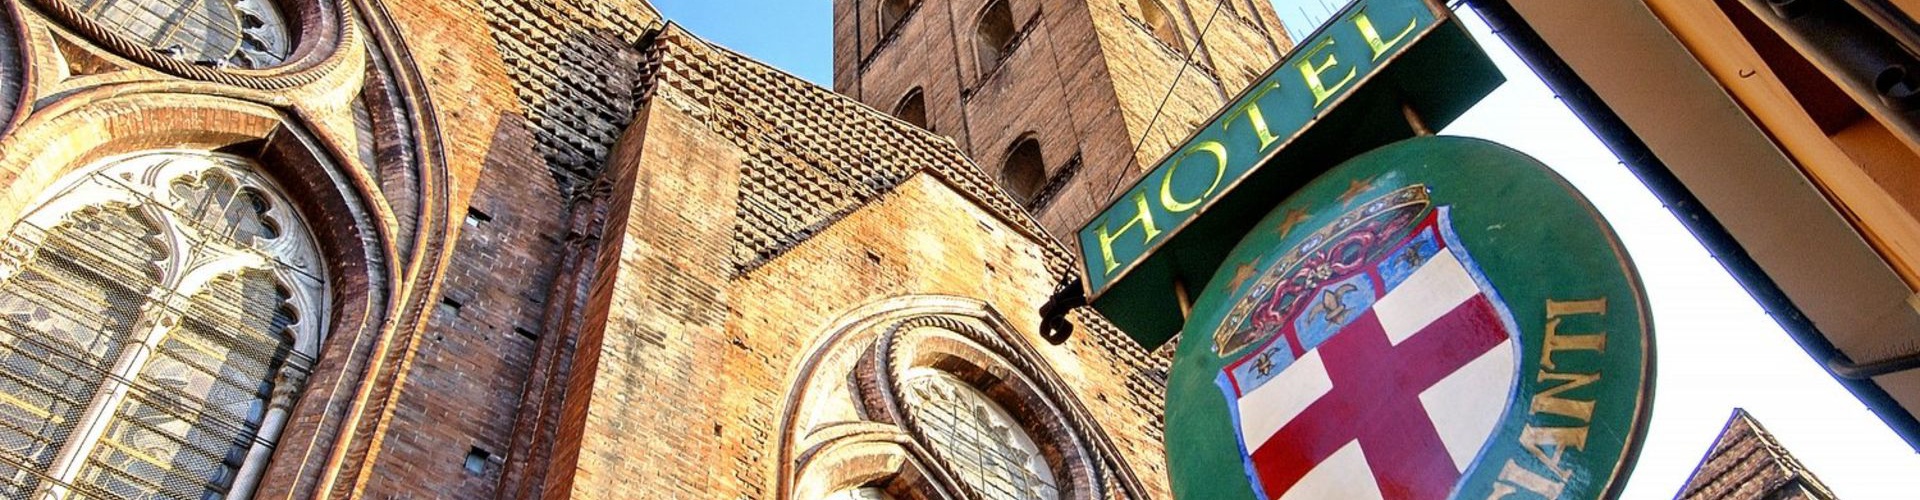 Commercianti Hotel rediseño - Bolonia - The Etruscan city: the other face of Bologna